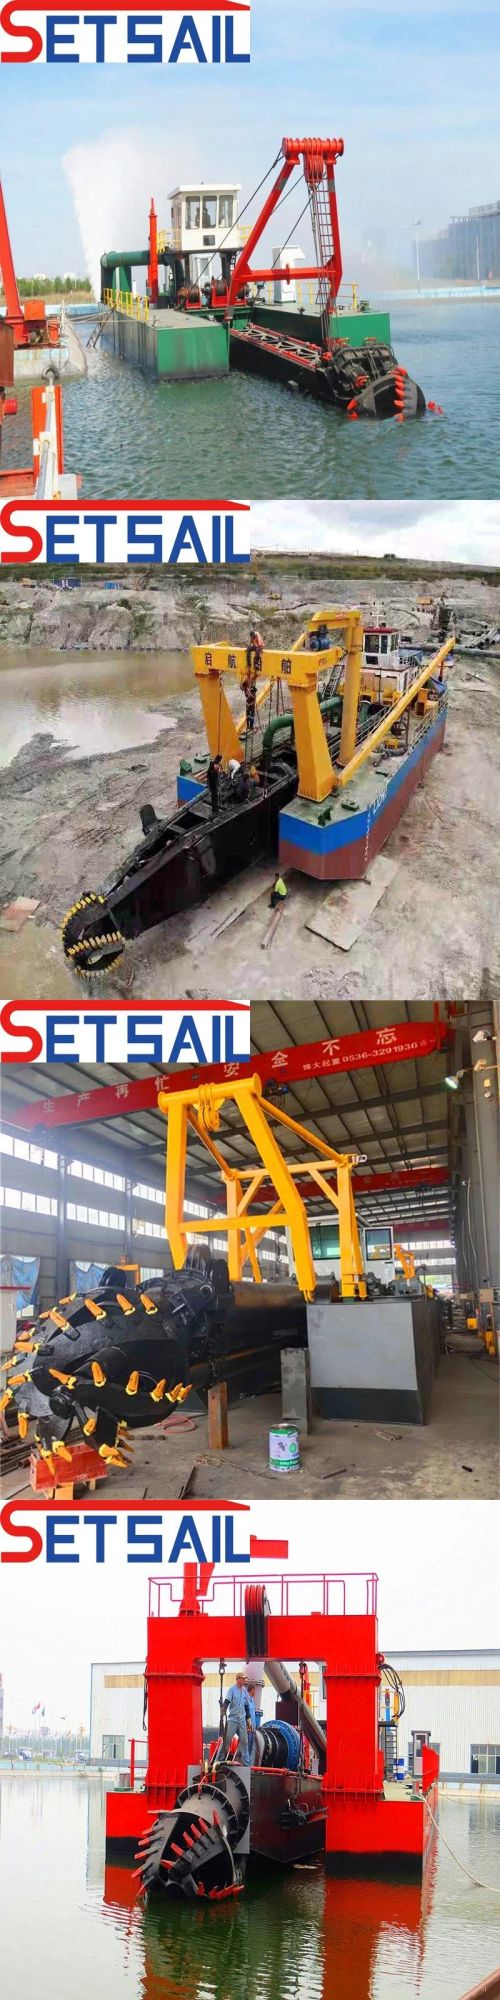 18inch Cutter Suction Dredger with Diesel Engine and Anchor Boom